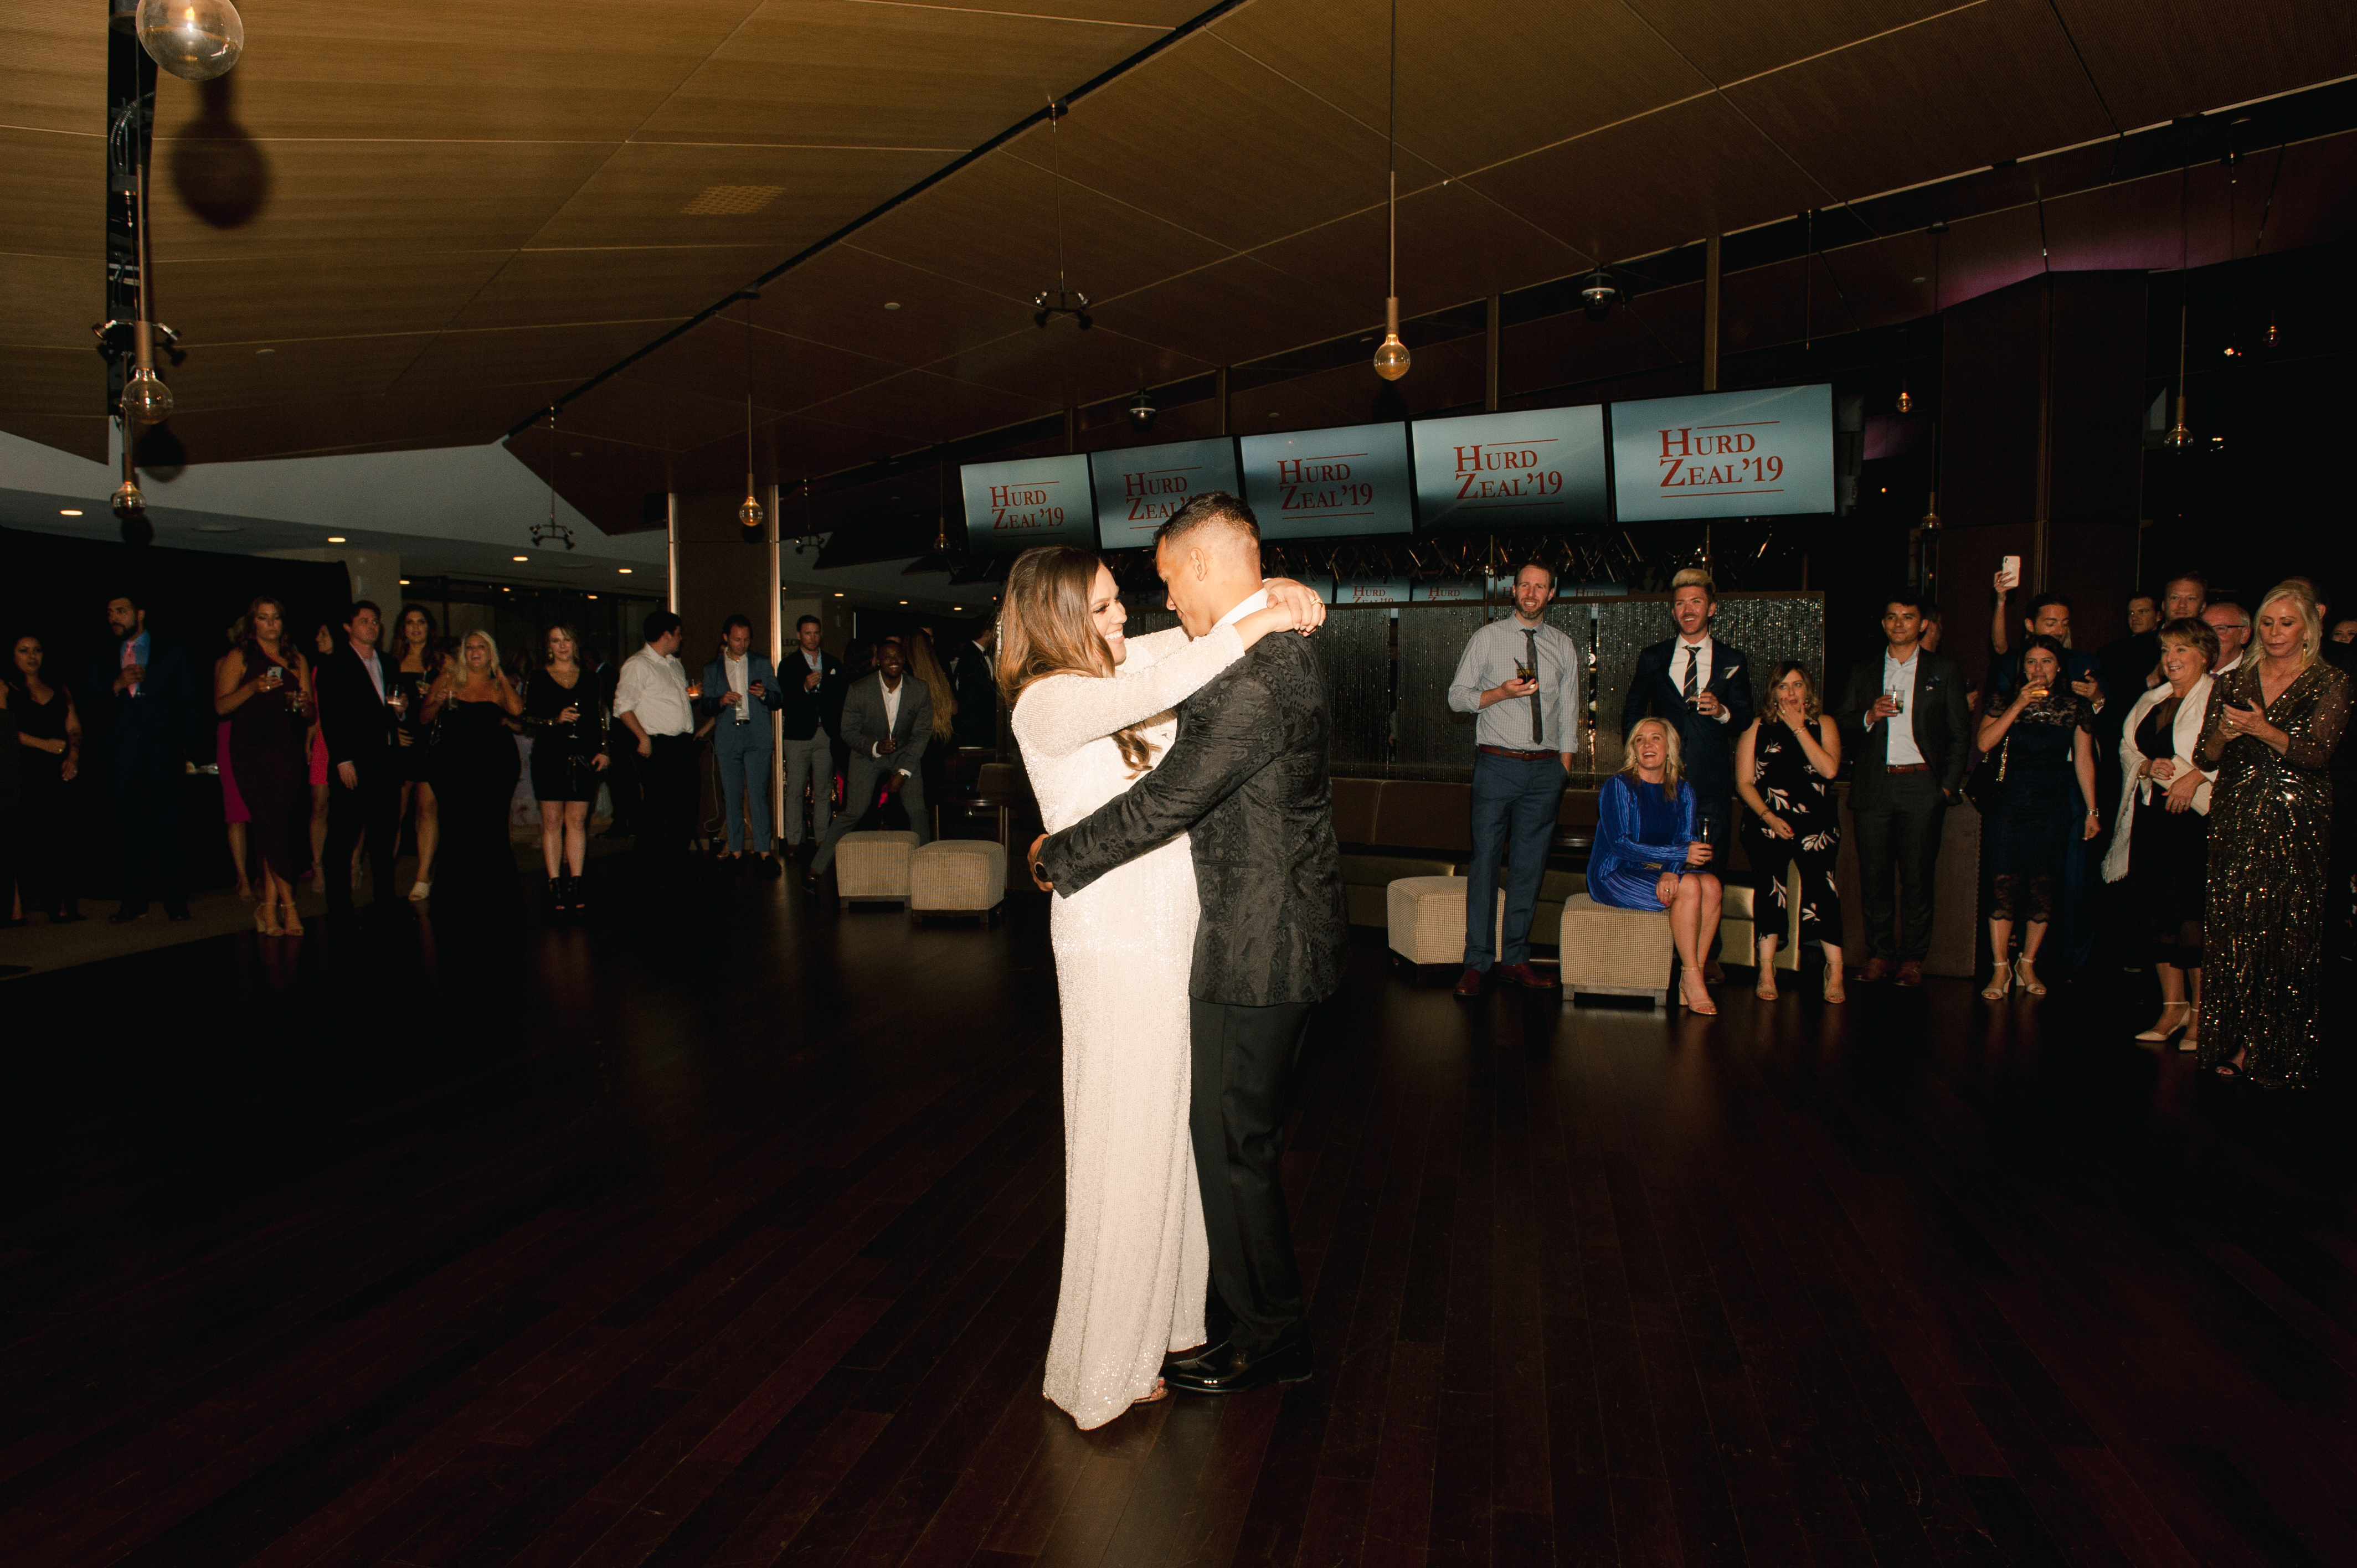 San Francisco blogger, Ashley Zeal from Two Peas in a Prada shares her wedding playlist. Including first dances, cocktail hour and dancing!